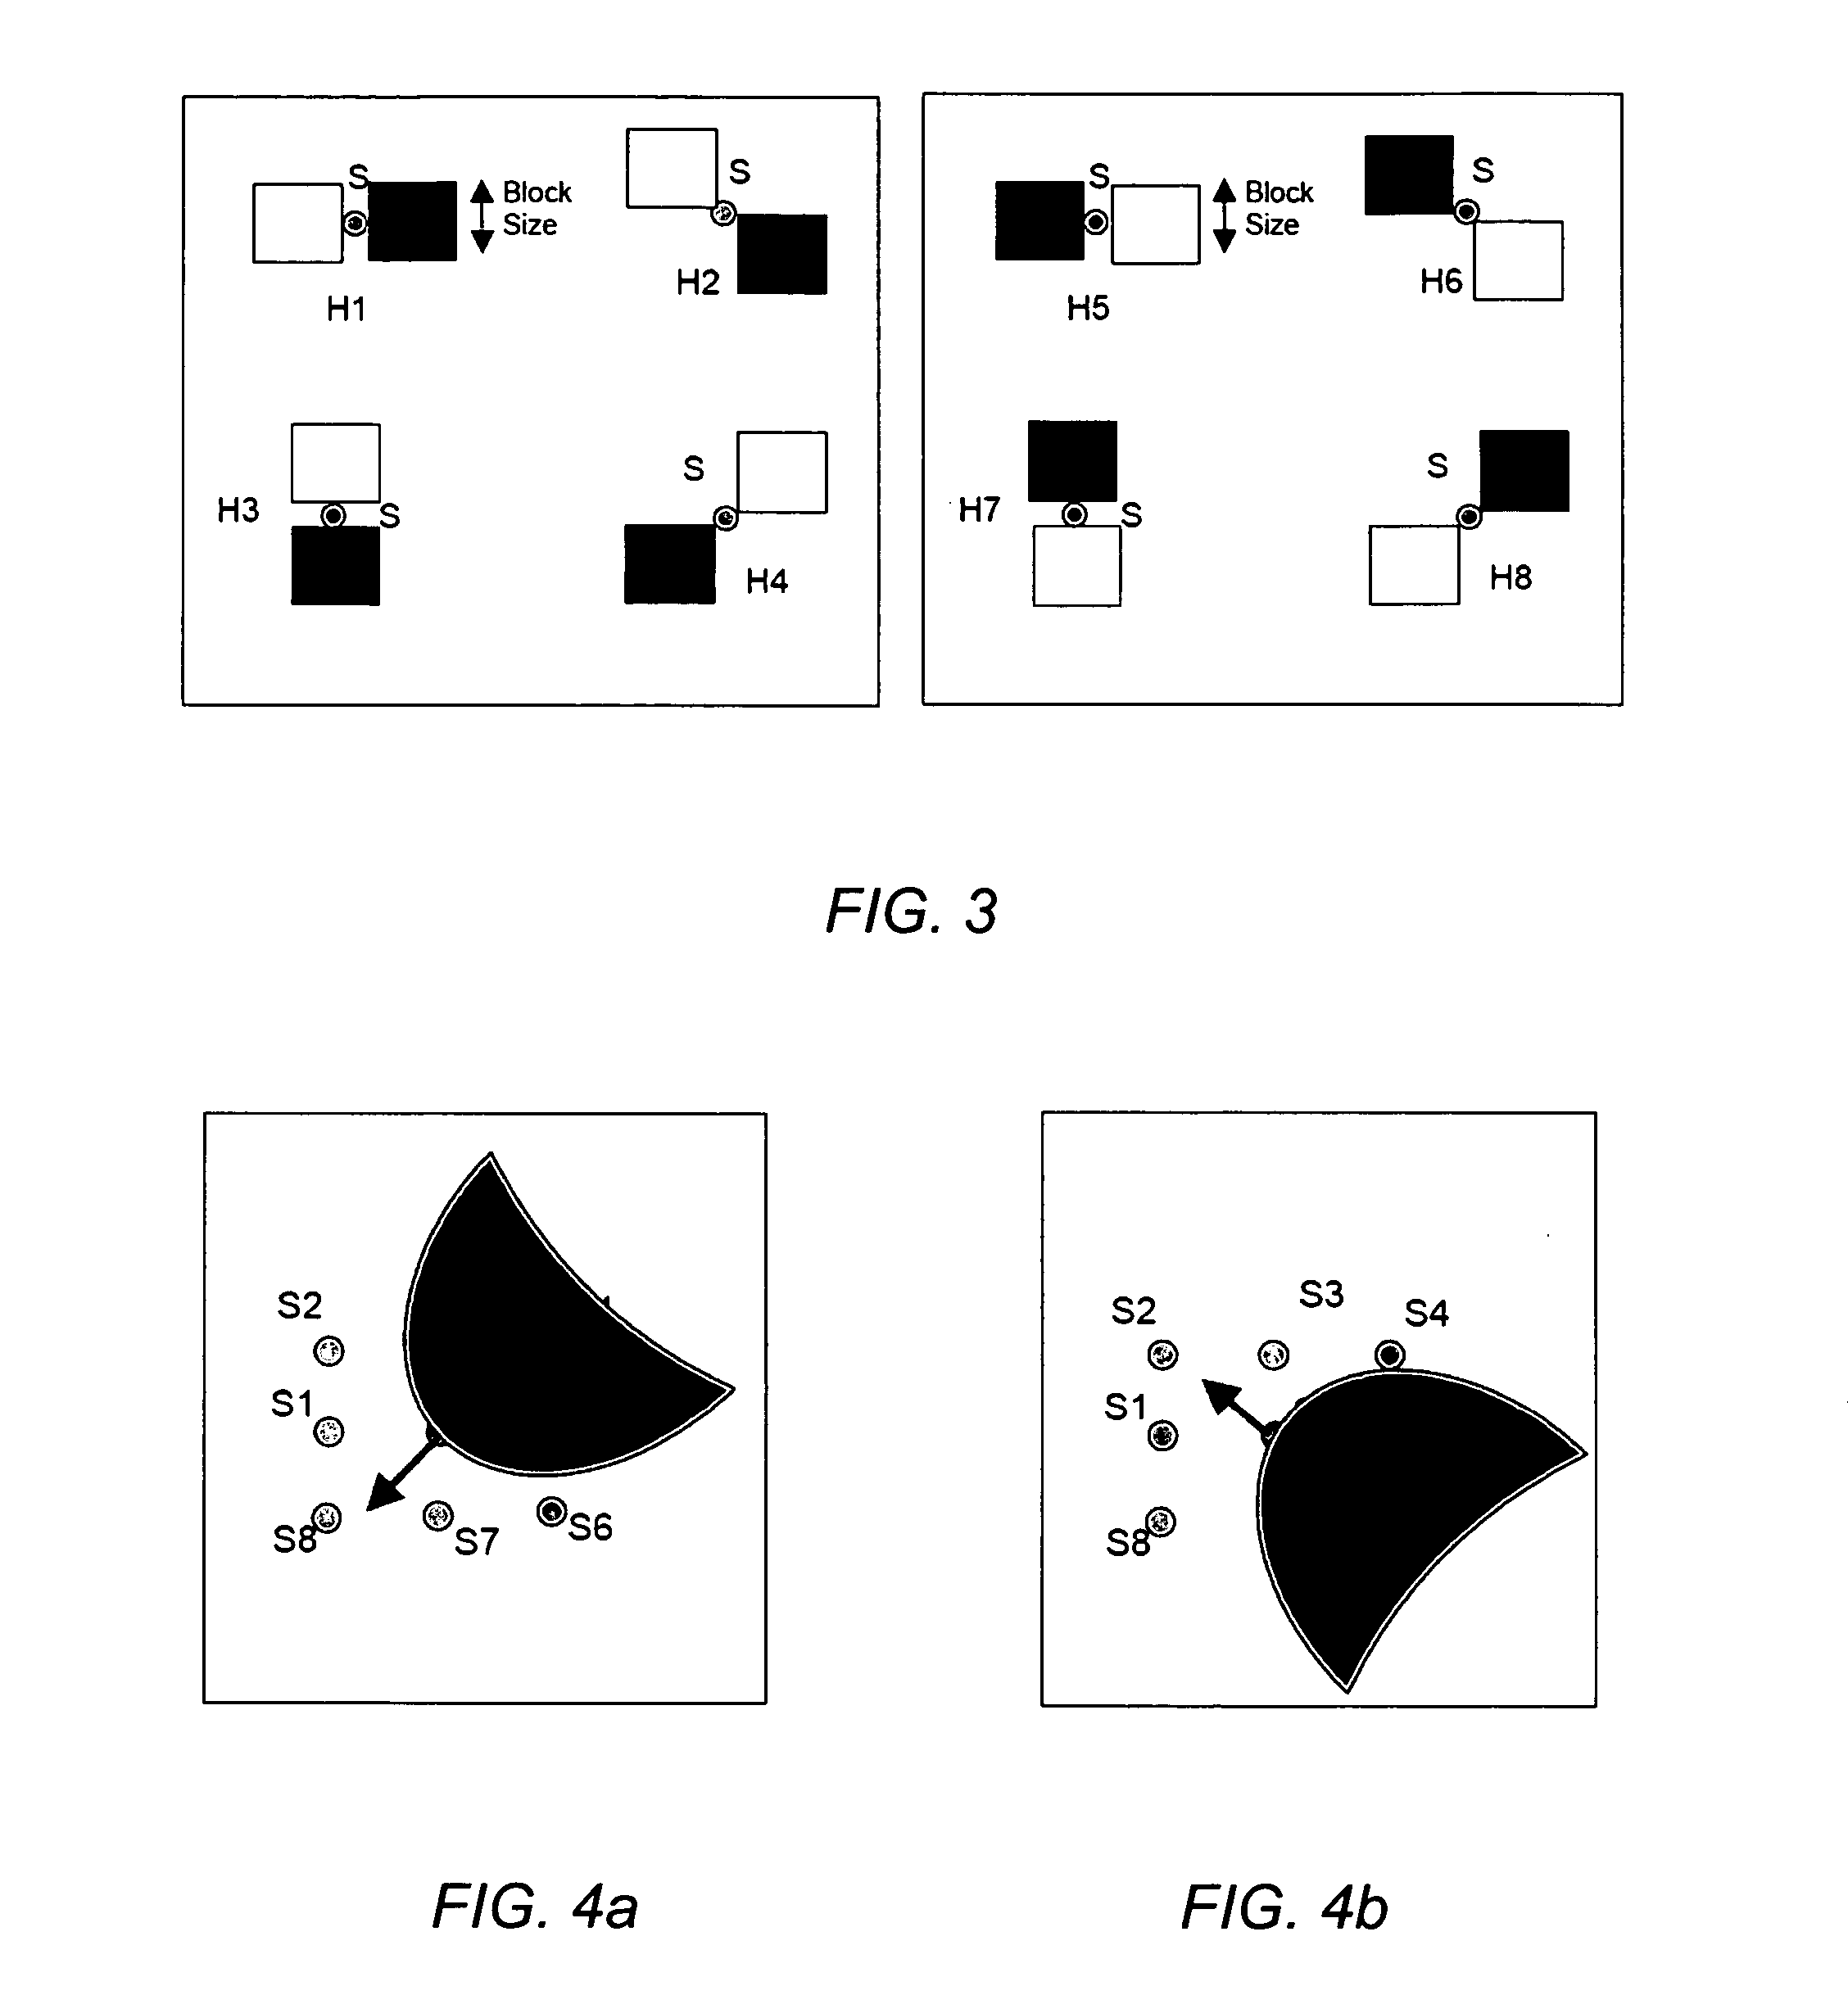 Image recognition system and method using holistic Harr-like feature matching